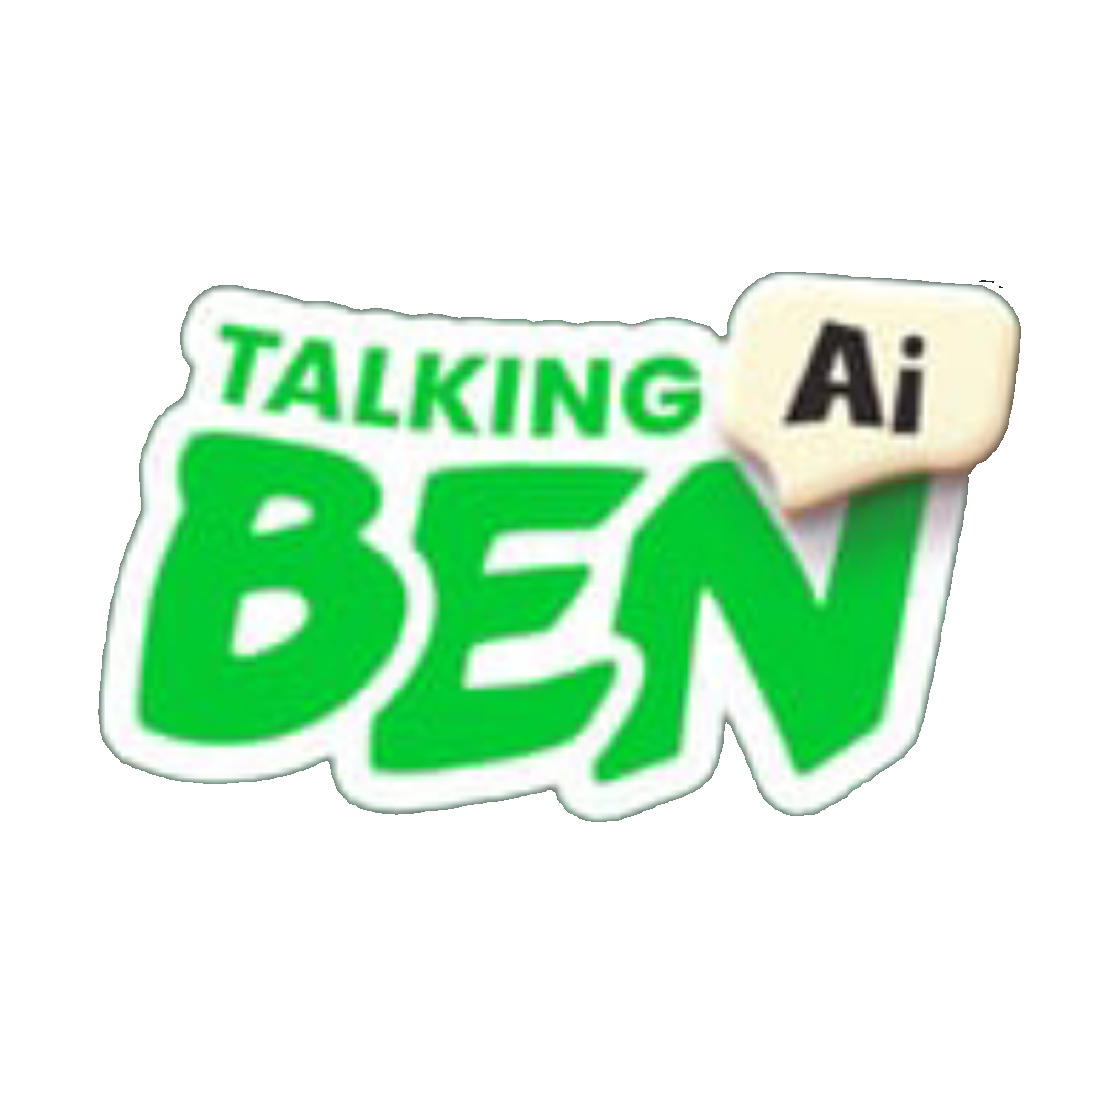 TALKING BEN AI IS RELEASED JUST NOW !